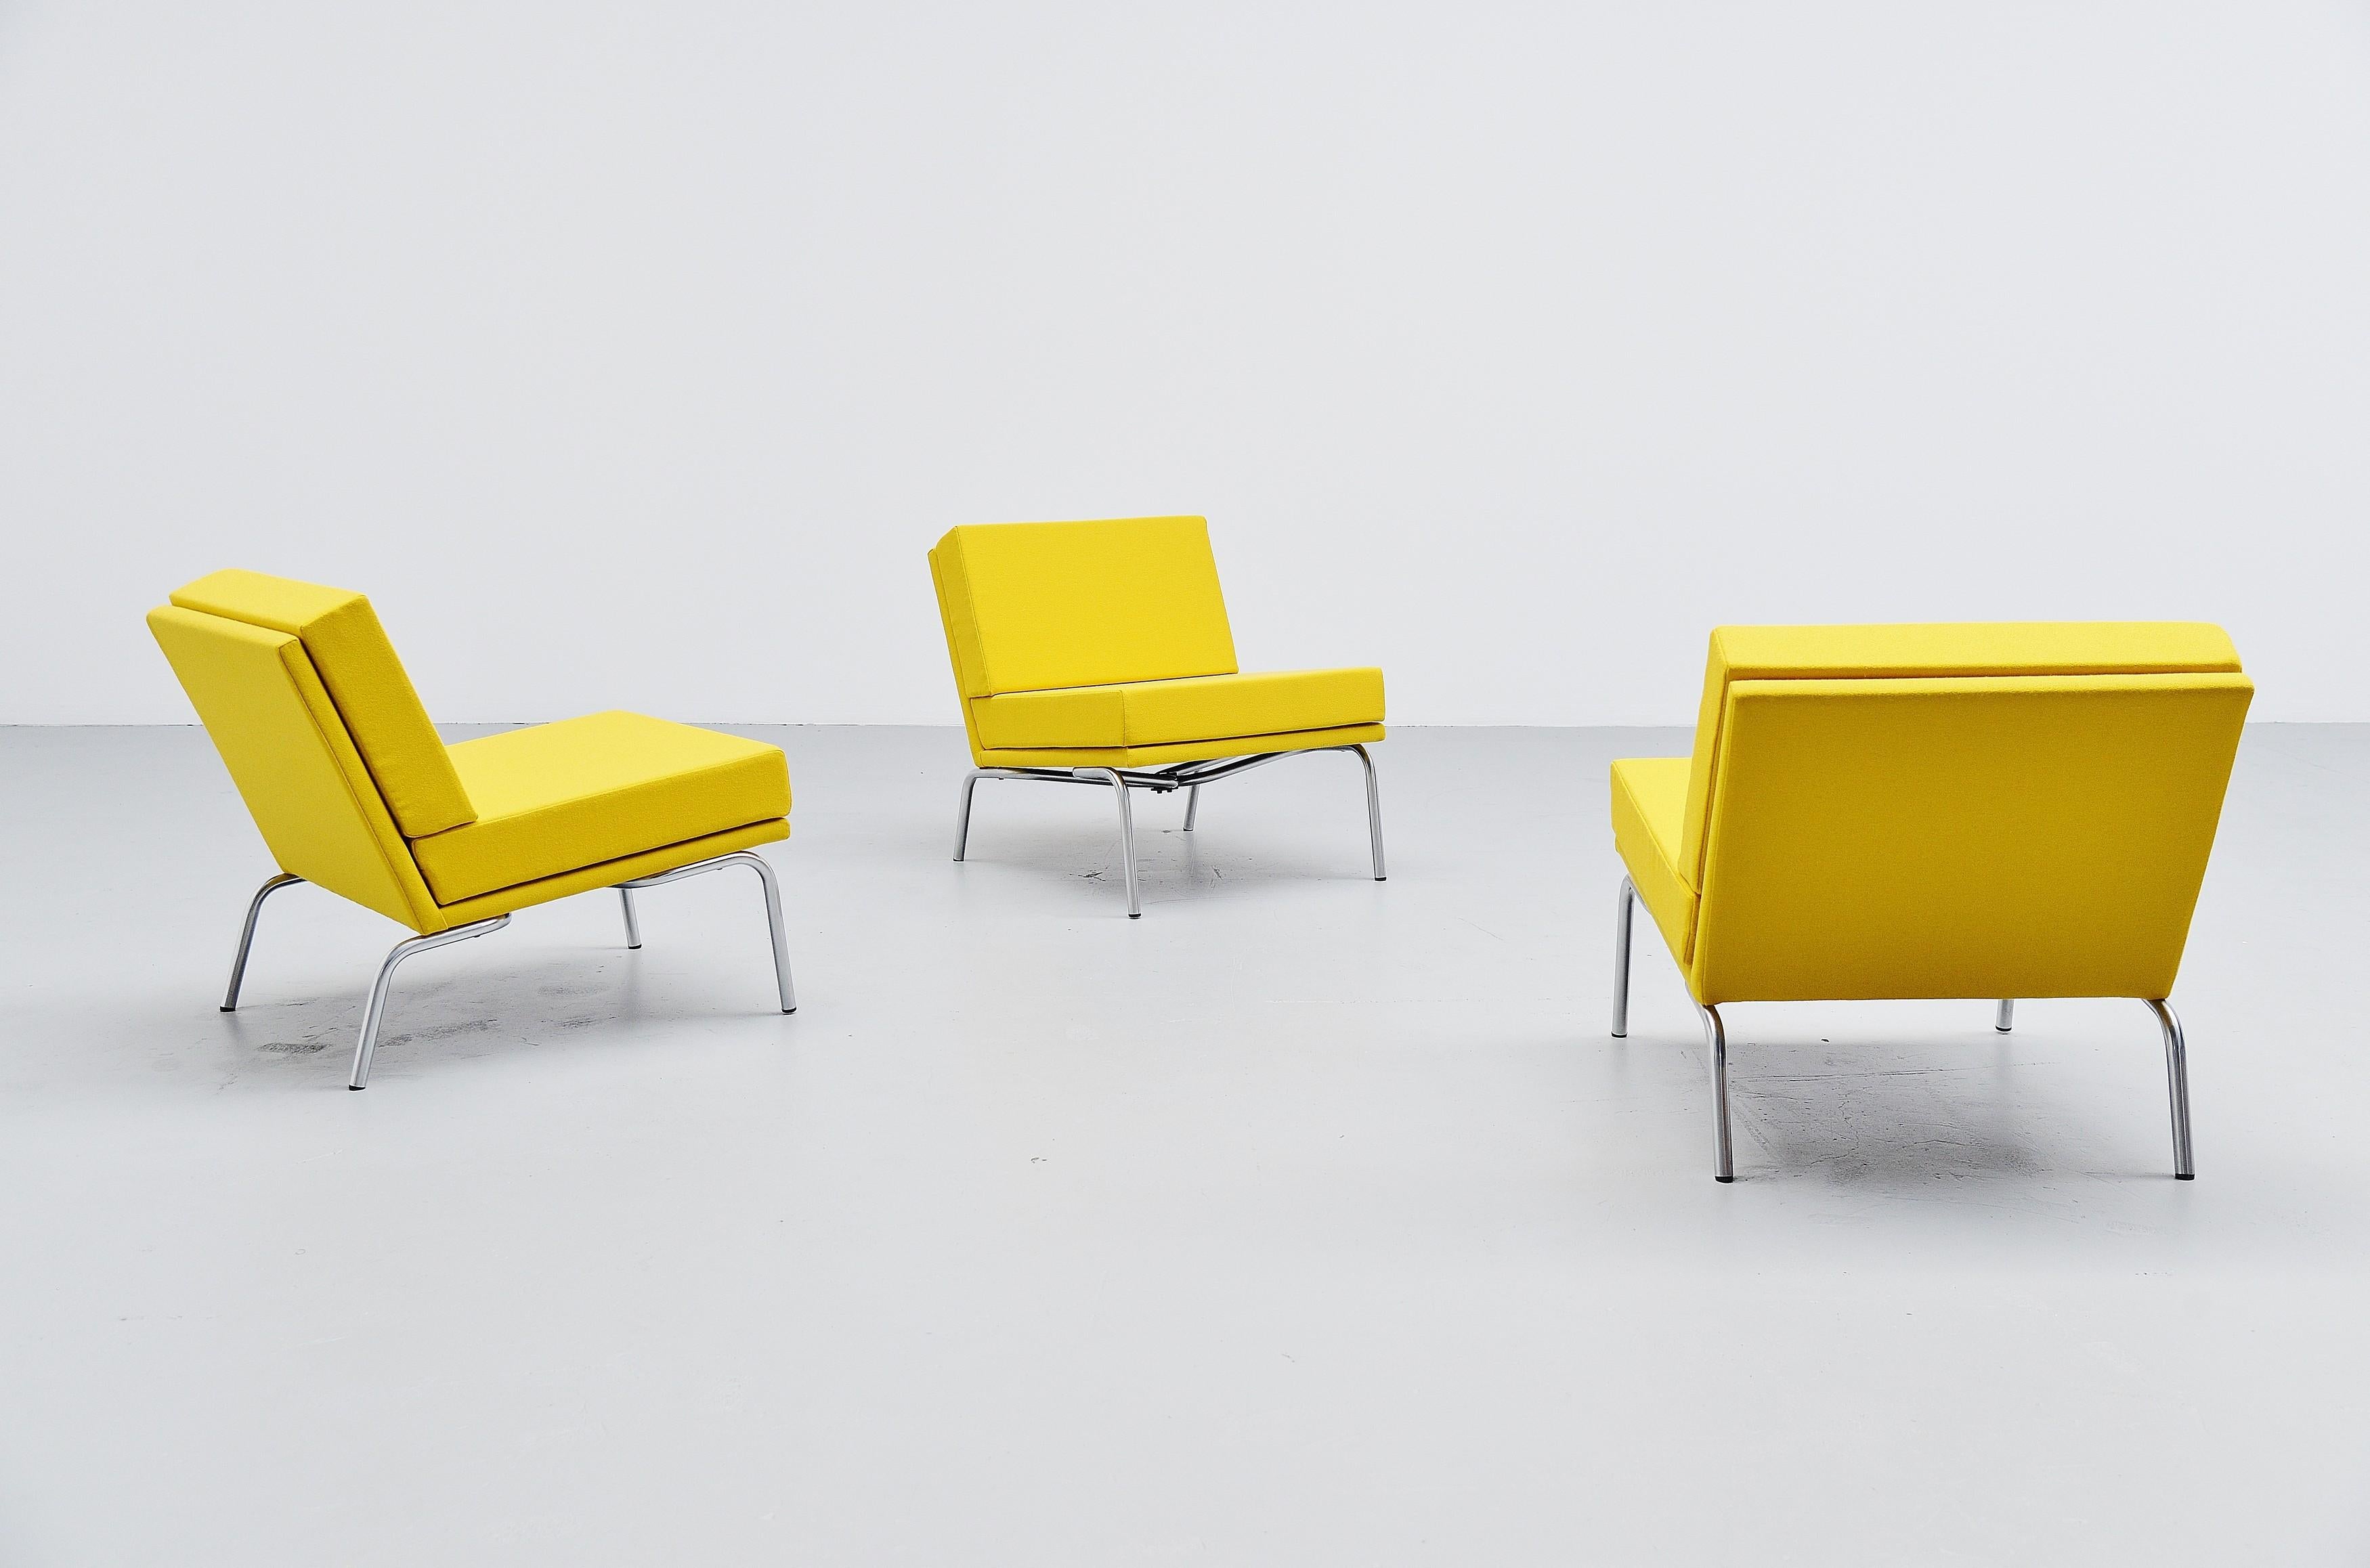 Rare set of 3 lounge chairs model SZ04 designed by Martin Visser and manufacturer by 't Spectrum, The Netherlands 1964. These lounge chairs can be put aside so they can be used as a modular sofa system as well. This model was only produced from